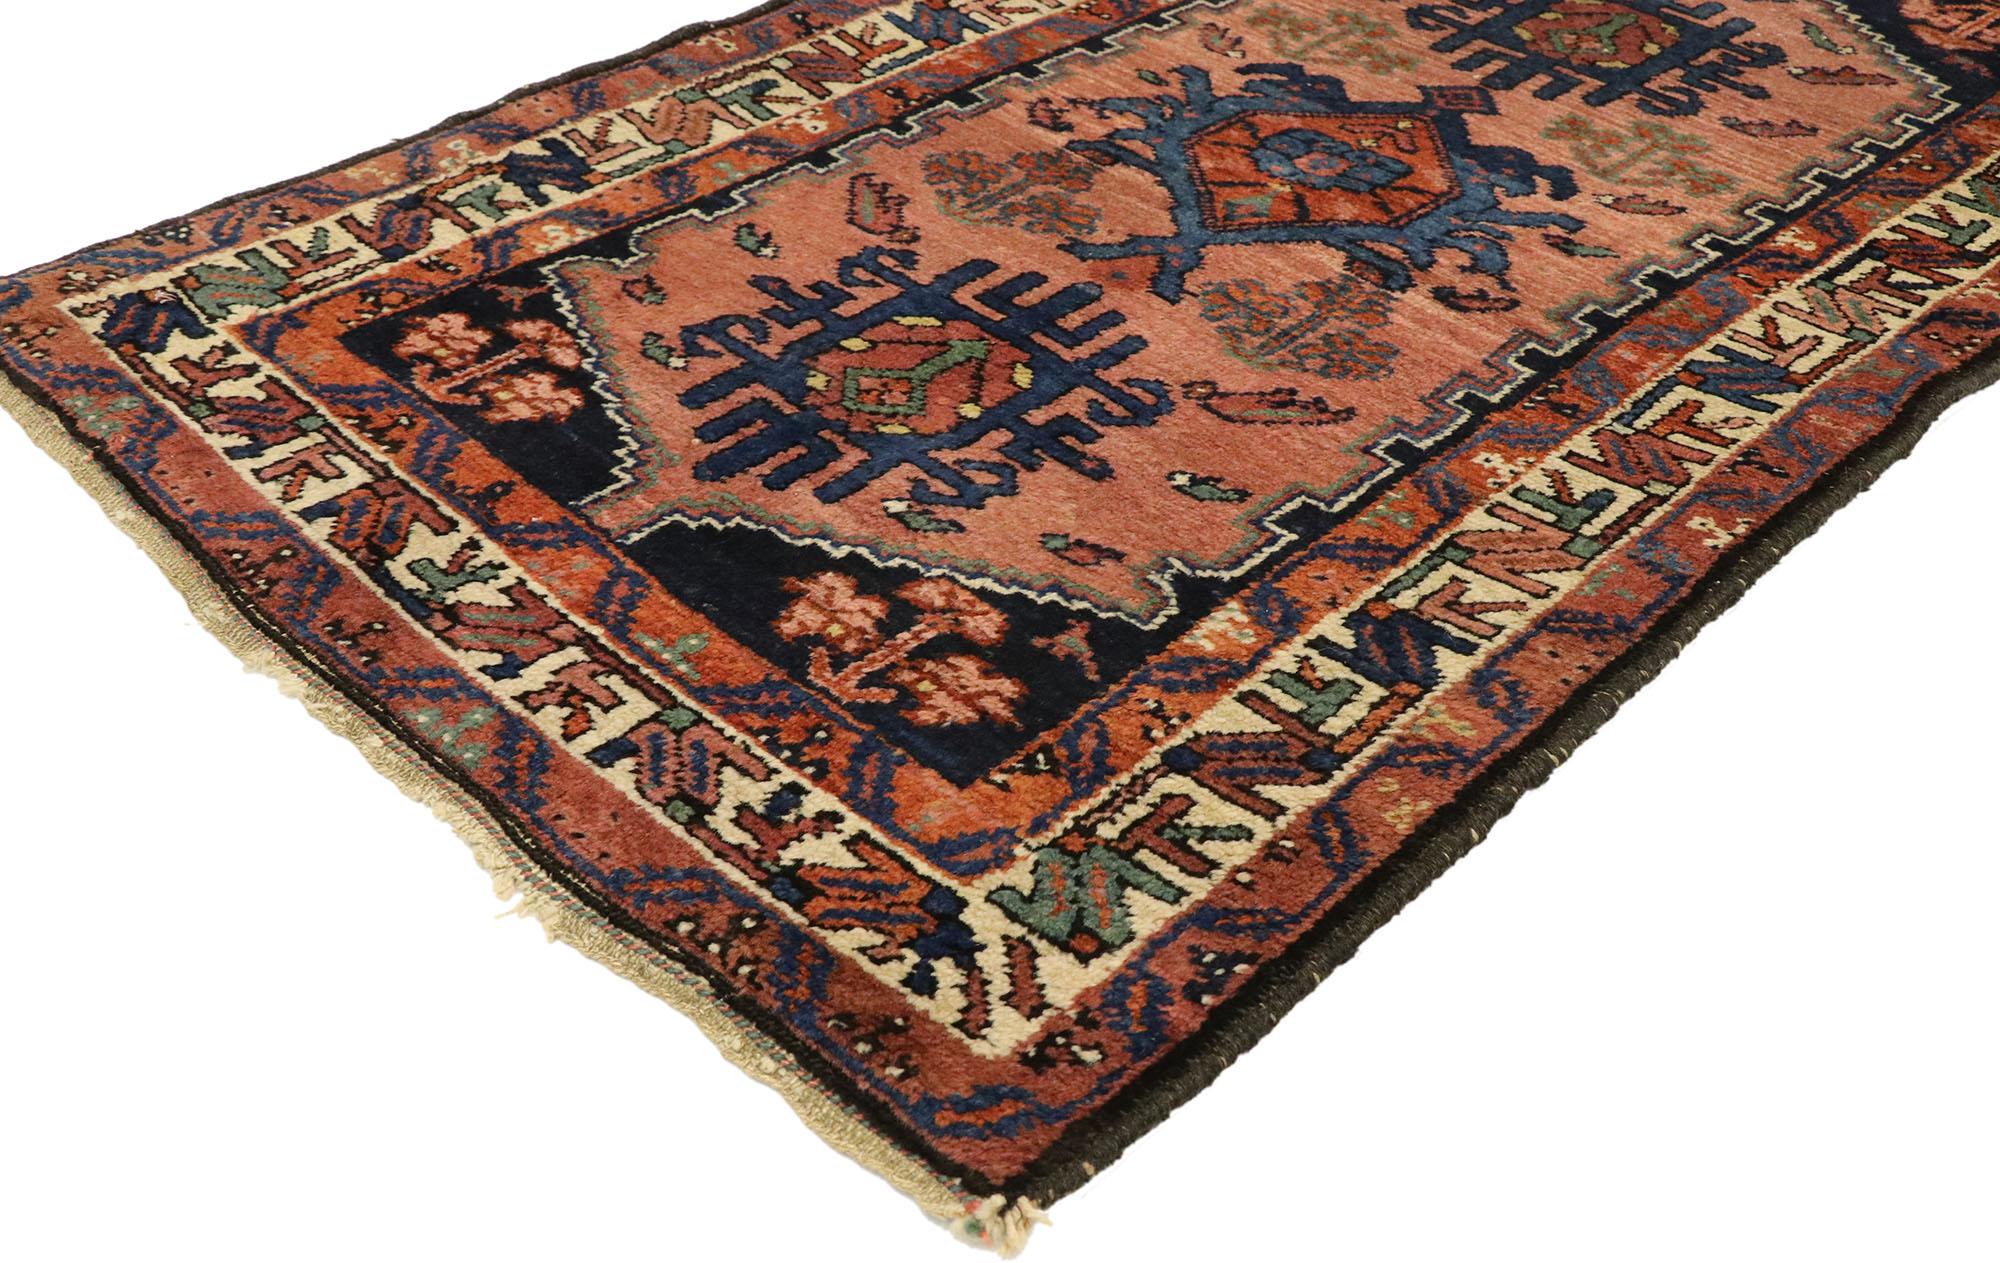 70963, antique Persian Nahavand Hamadan accent rug with Southwest Desert Boho style 02'05 X 03'10. Effortless beauty and simplicity meet nomadic charm with a southwest desert boho style in this hand knotted wool antique Persian Nahavand Hamadan